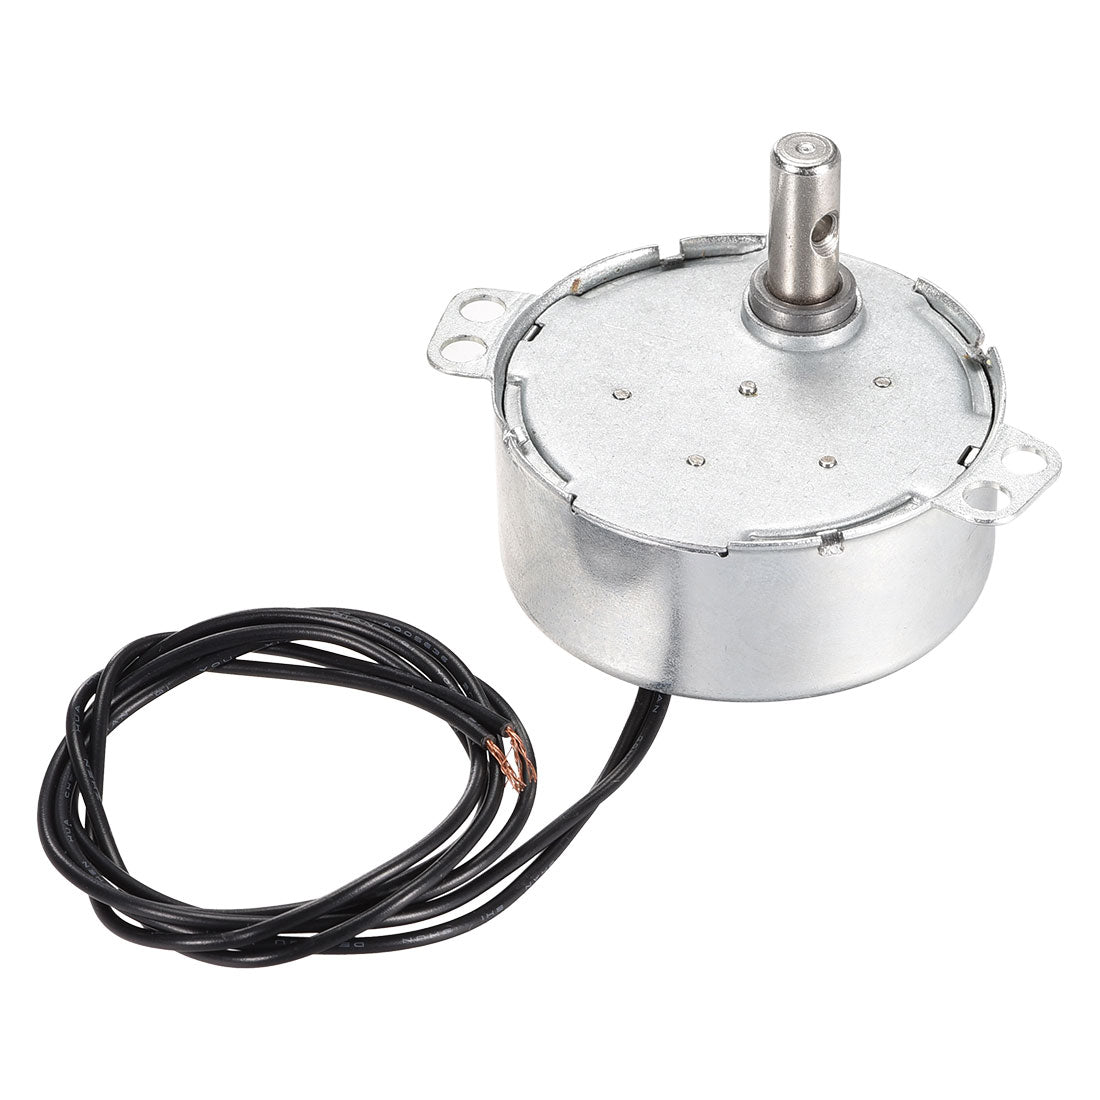 uxcell Uxcell Synchronous Motor 220-240 VAC 50/60 Hz 4W 2.5-3 RPM/MIN C/ Direction with 7mm Flexible Coupling Connector for Model or Guide Motor